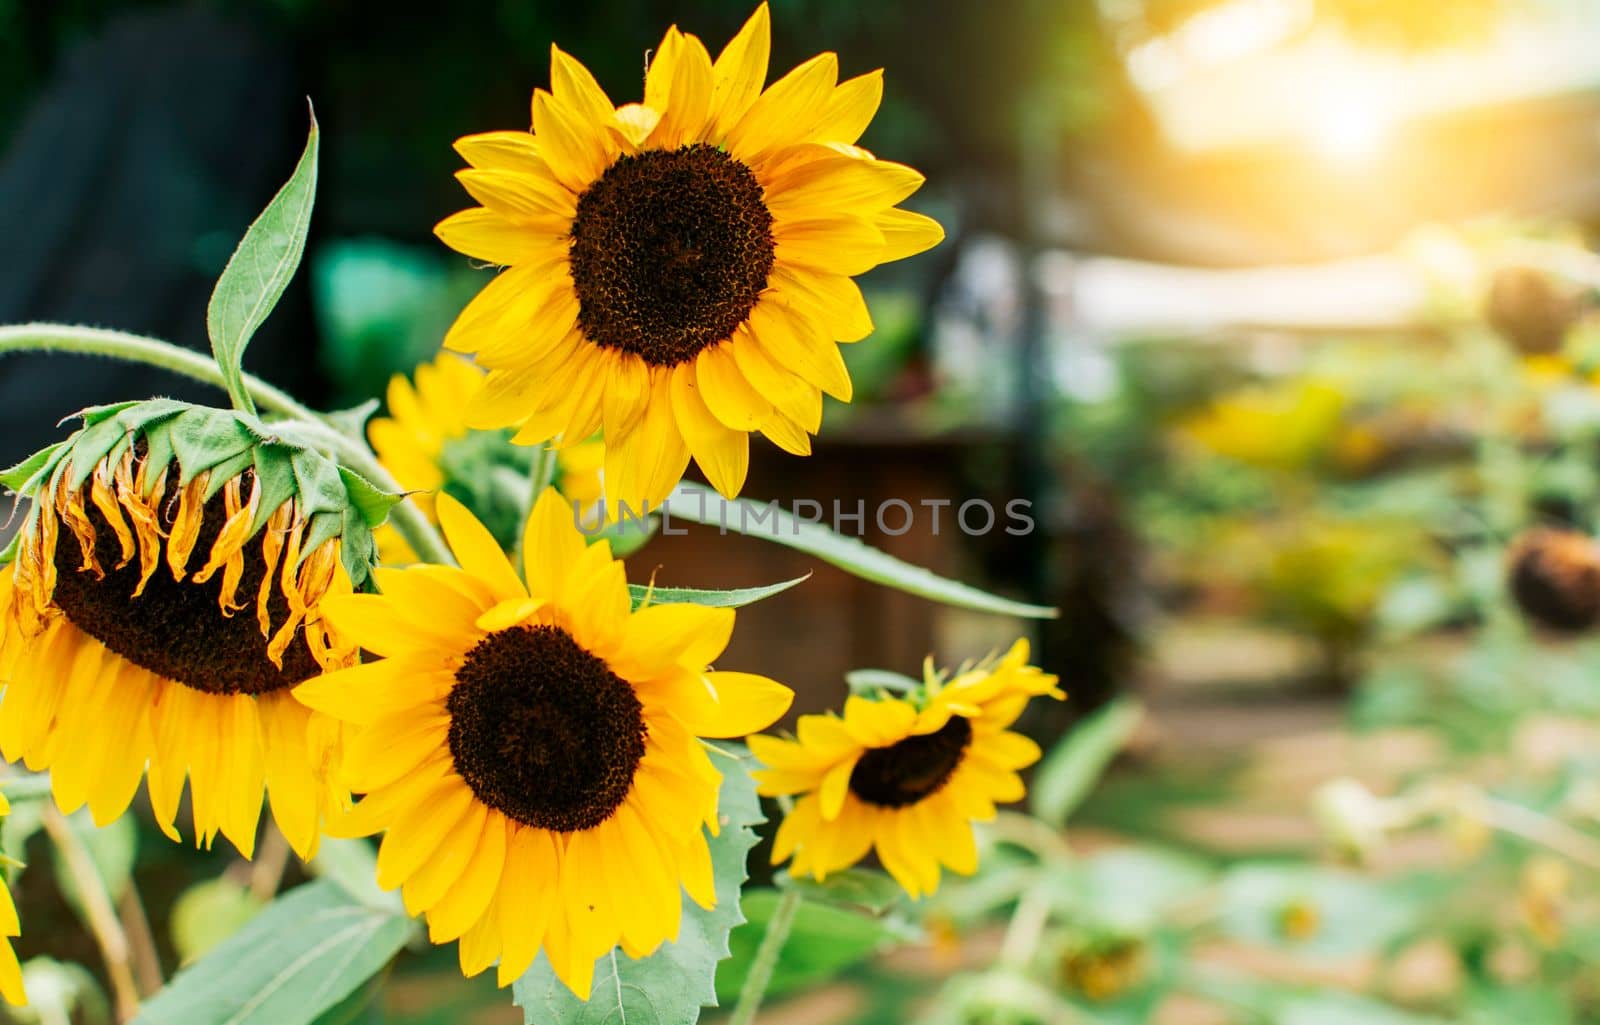 Four yellow sunflowers in a garden, Close up of four beautiful sunflowers in a garden at sunset. Details of sunflowers and petals. Beautiful sunflowers in a natural garden on a sunny day